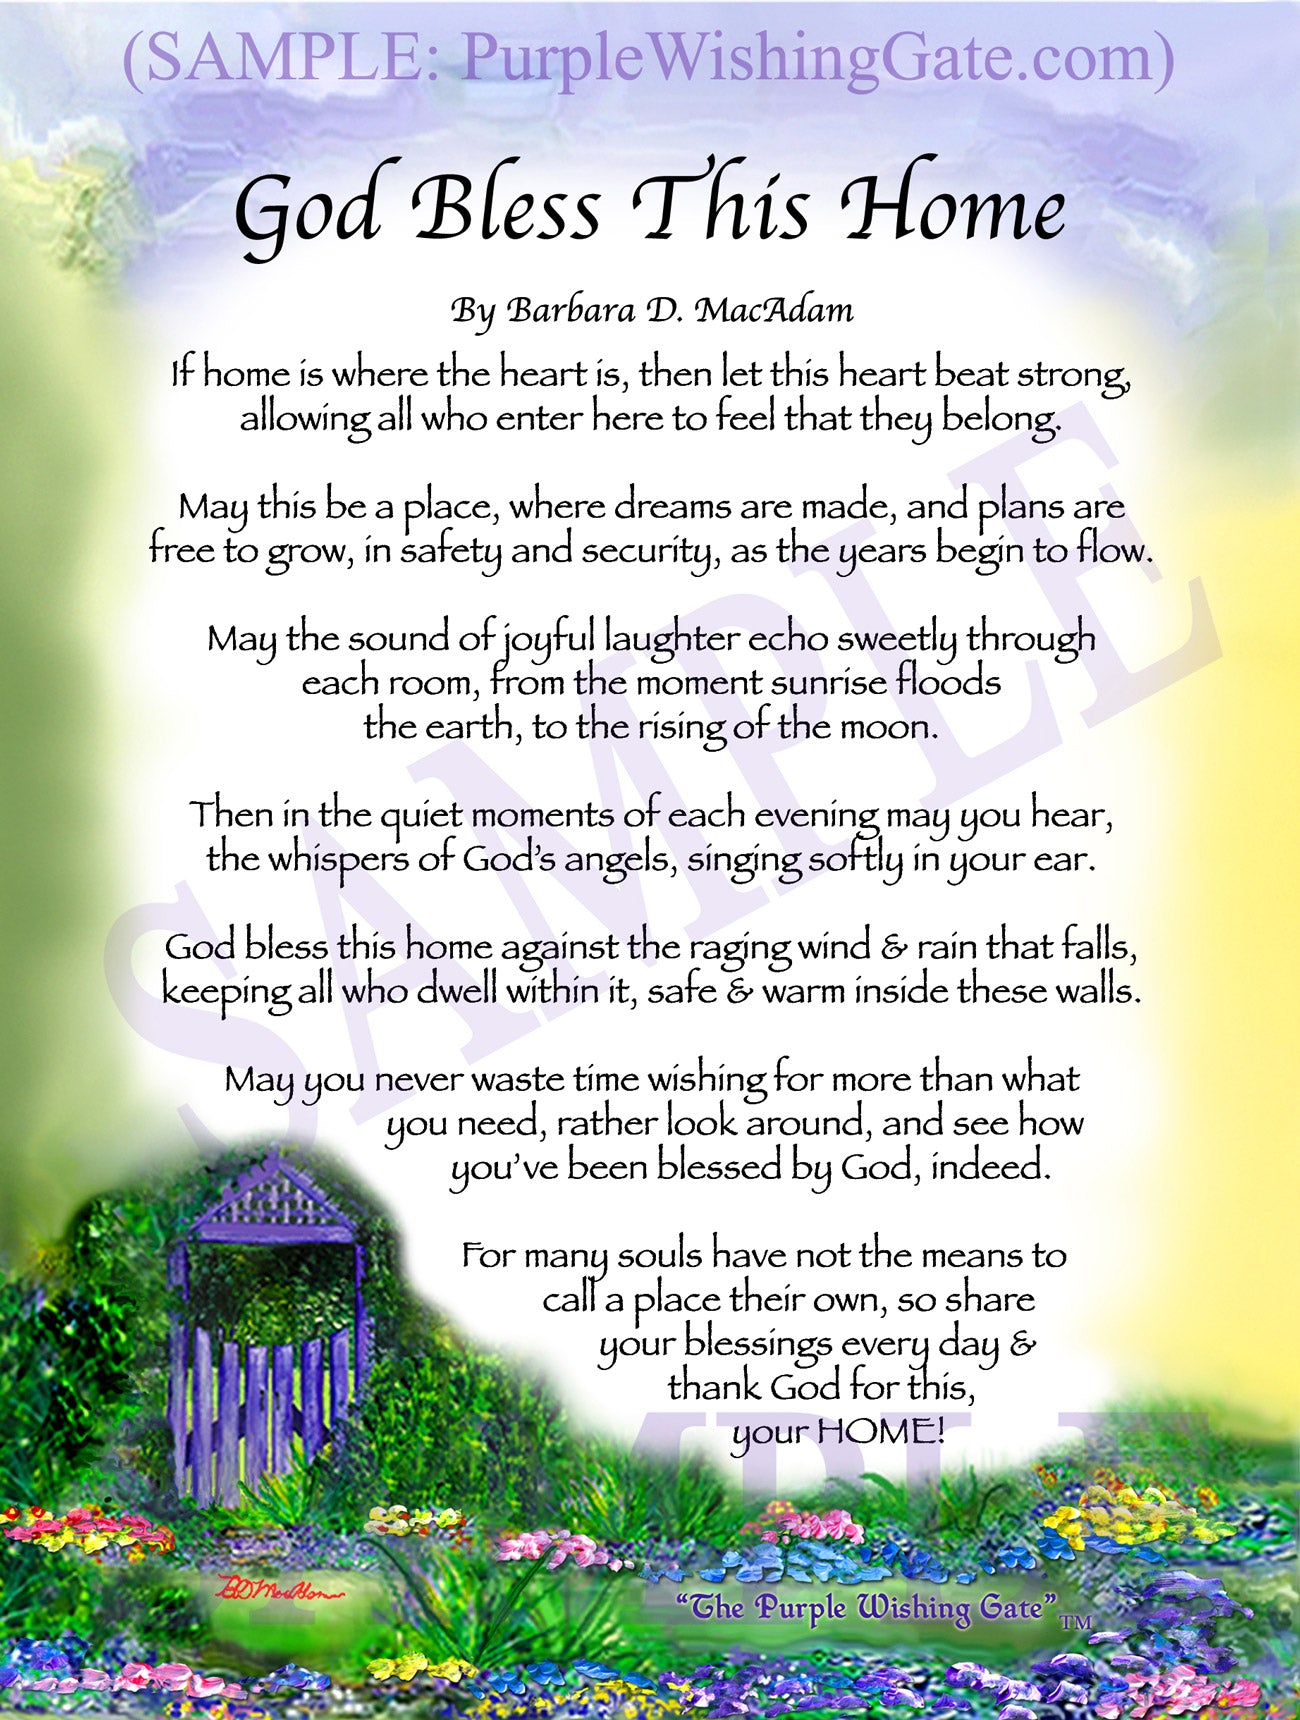 
              
        		God Bless This Home - House Warming Gift - PurpleWishingGate.com
        		
        	